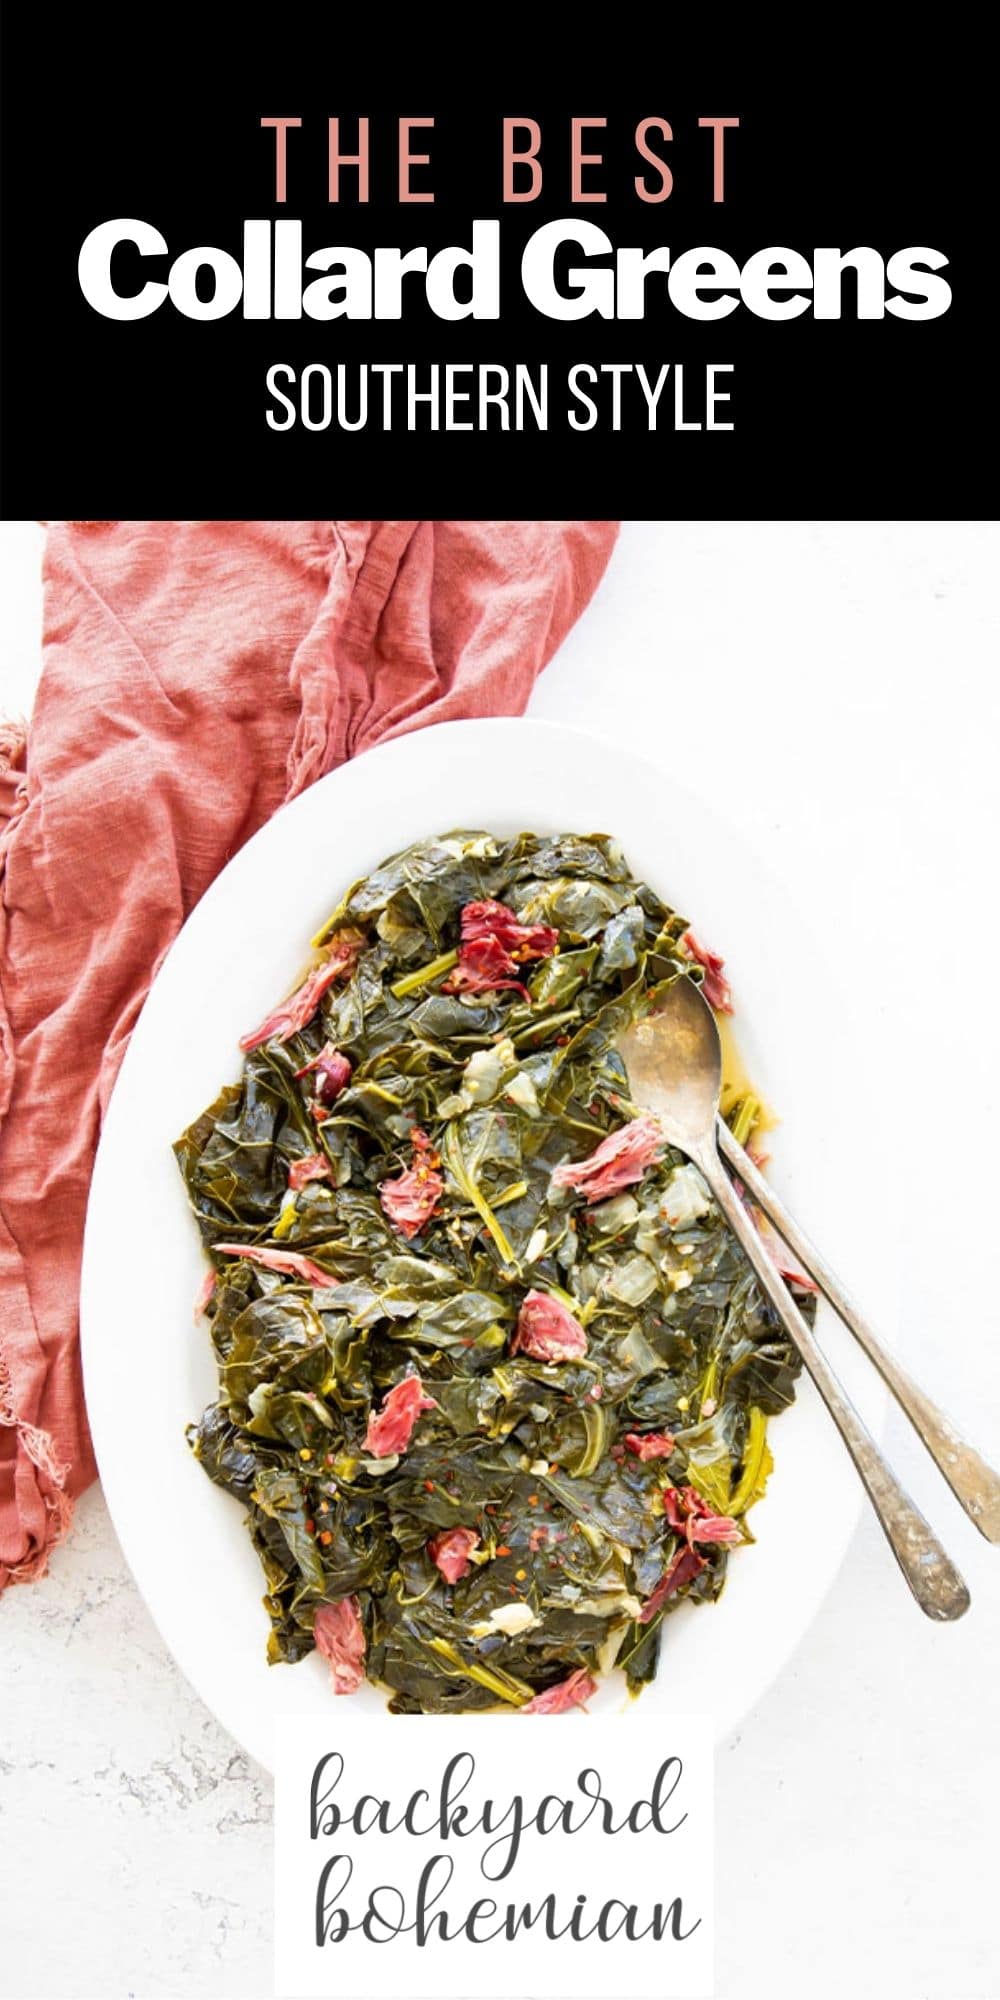 Southern style collard greens are simmered for hours with smoked turkey necks and loads of seasoning to provide the most velvety, decadent greens you've ever had! This is a true southern recipe that has been passed down for generations!